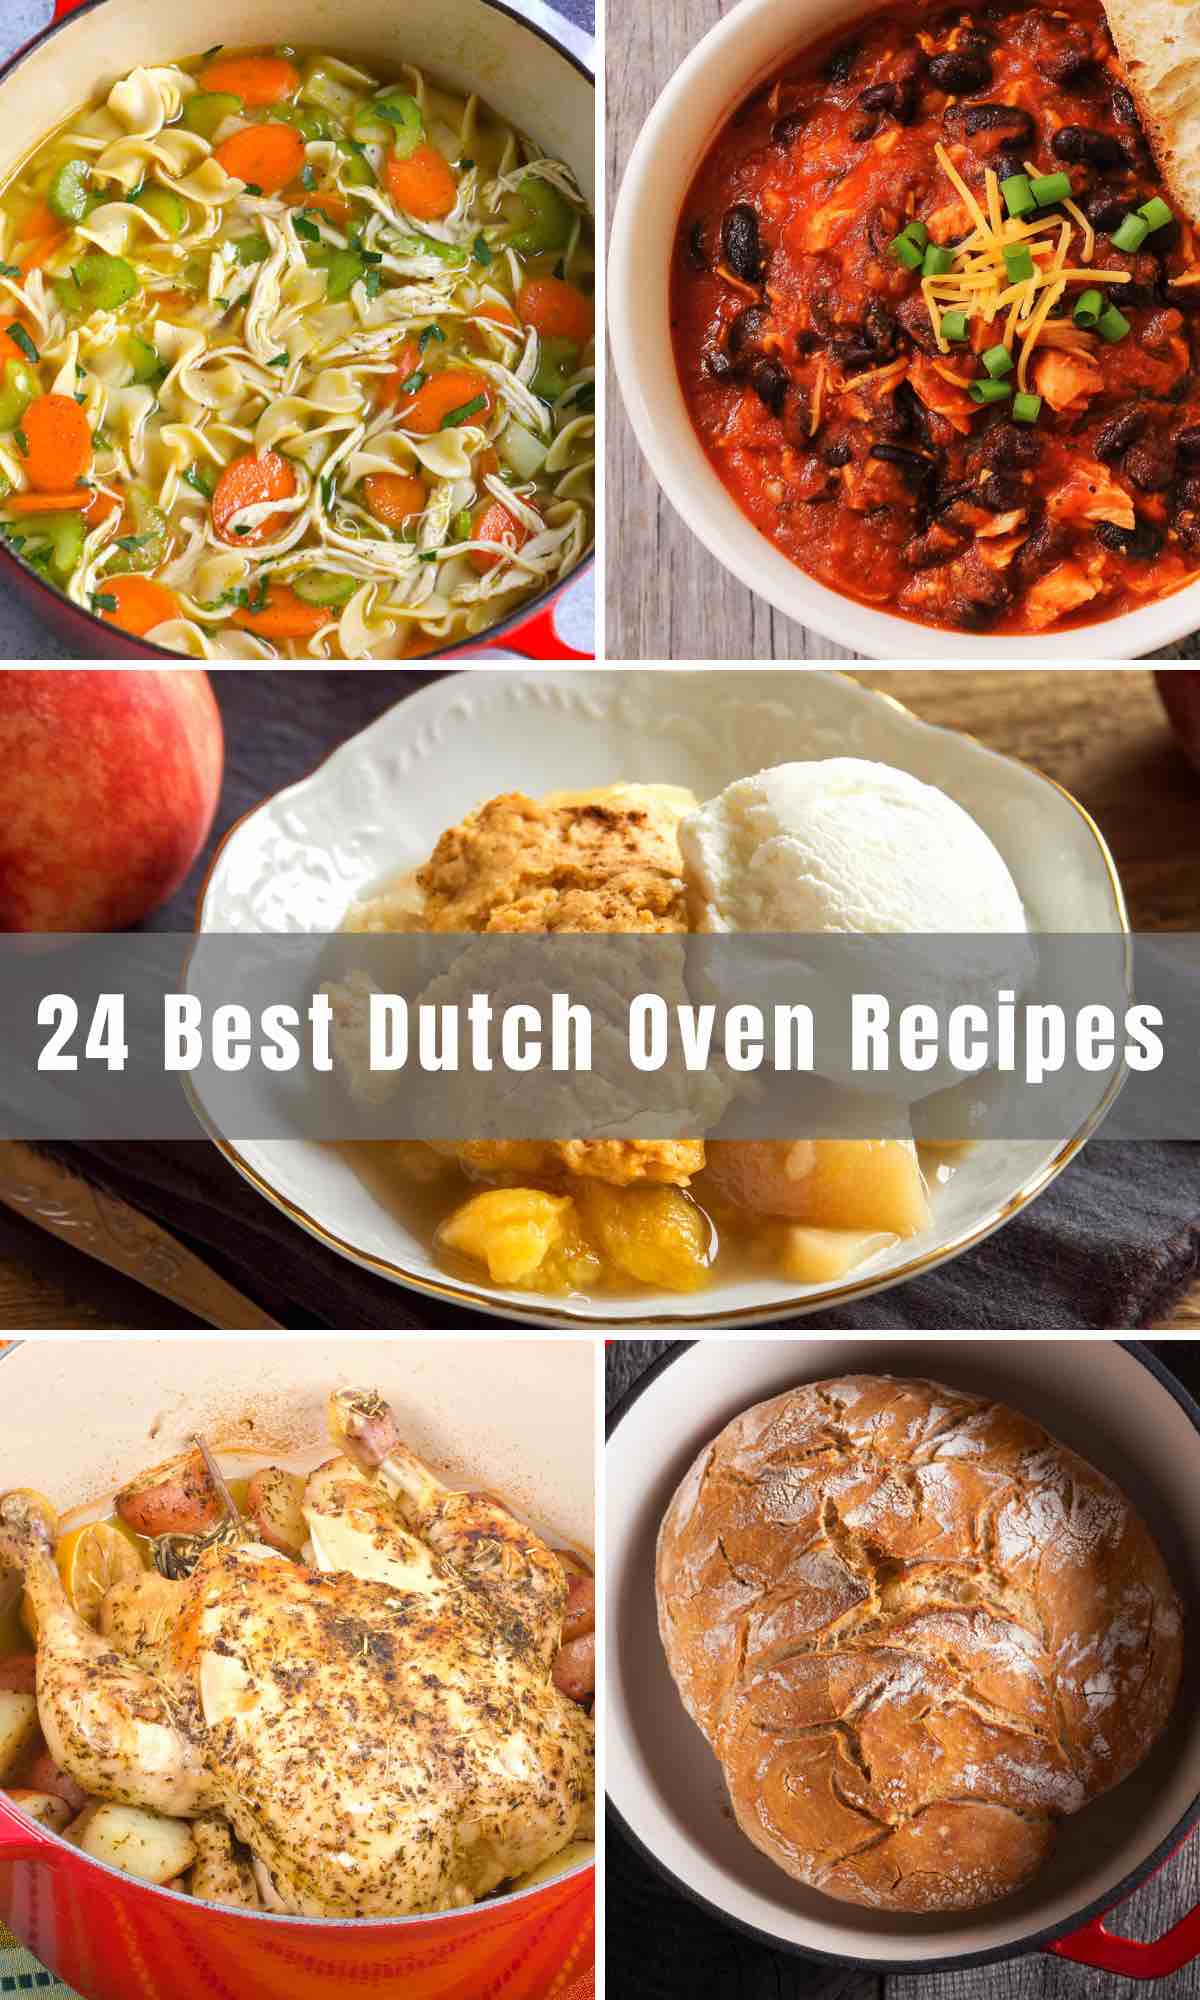 We've collected 24 of the very Best Dutch Oven Recipes that will make your life and your cooking nights so much better! From whipping up everyday meals to conquering campfire feasts, Dutch ovens can truly do it all!